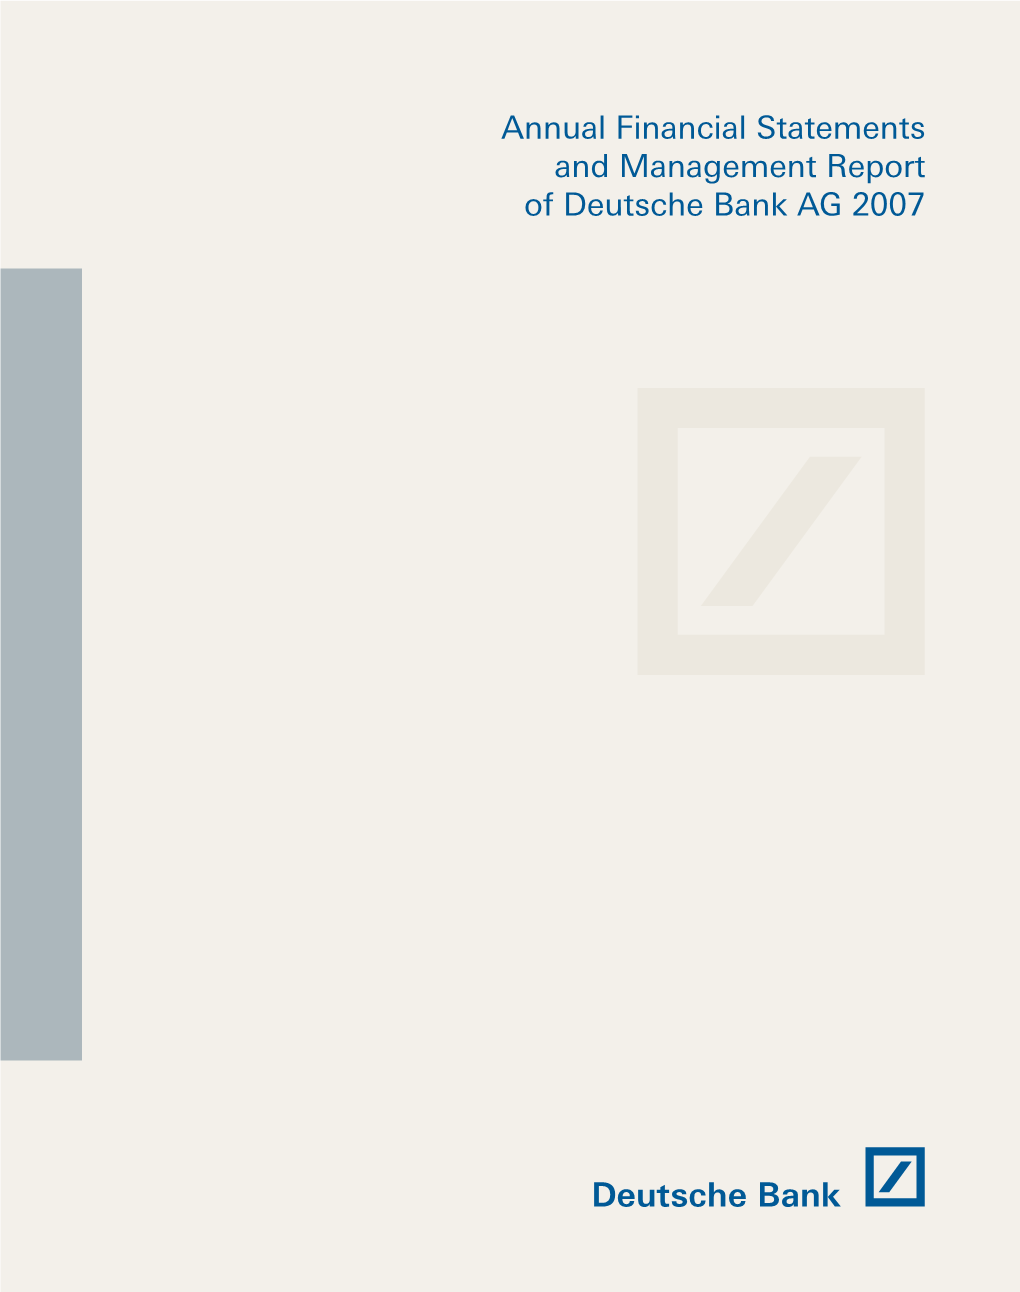 Annual Financial Statements and Management Report of Deutsche Bank AG 2007